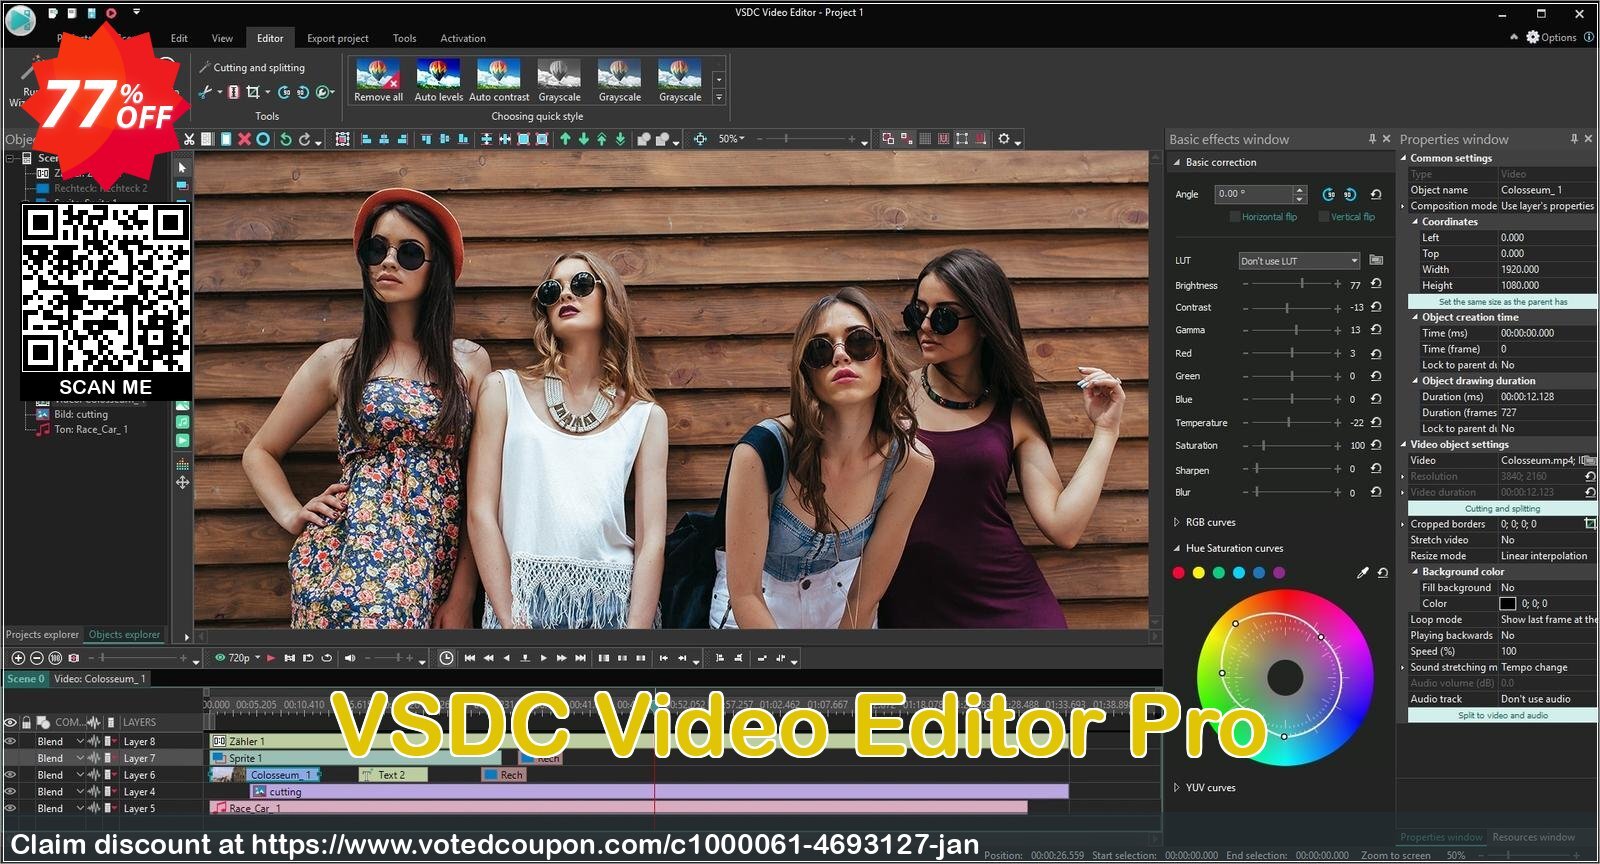 VSDC Video Editor Pro voted-on promotion codes